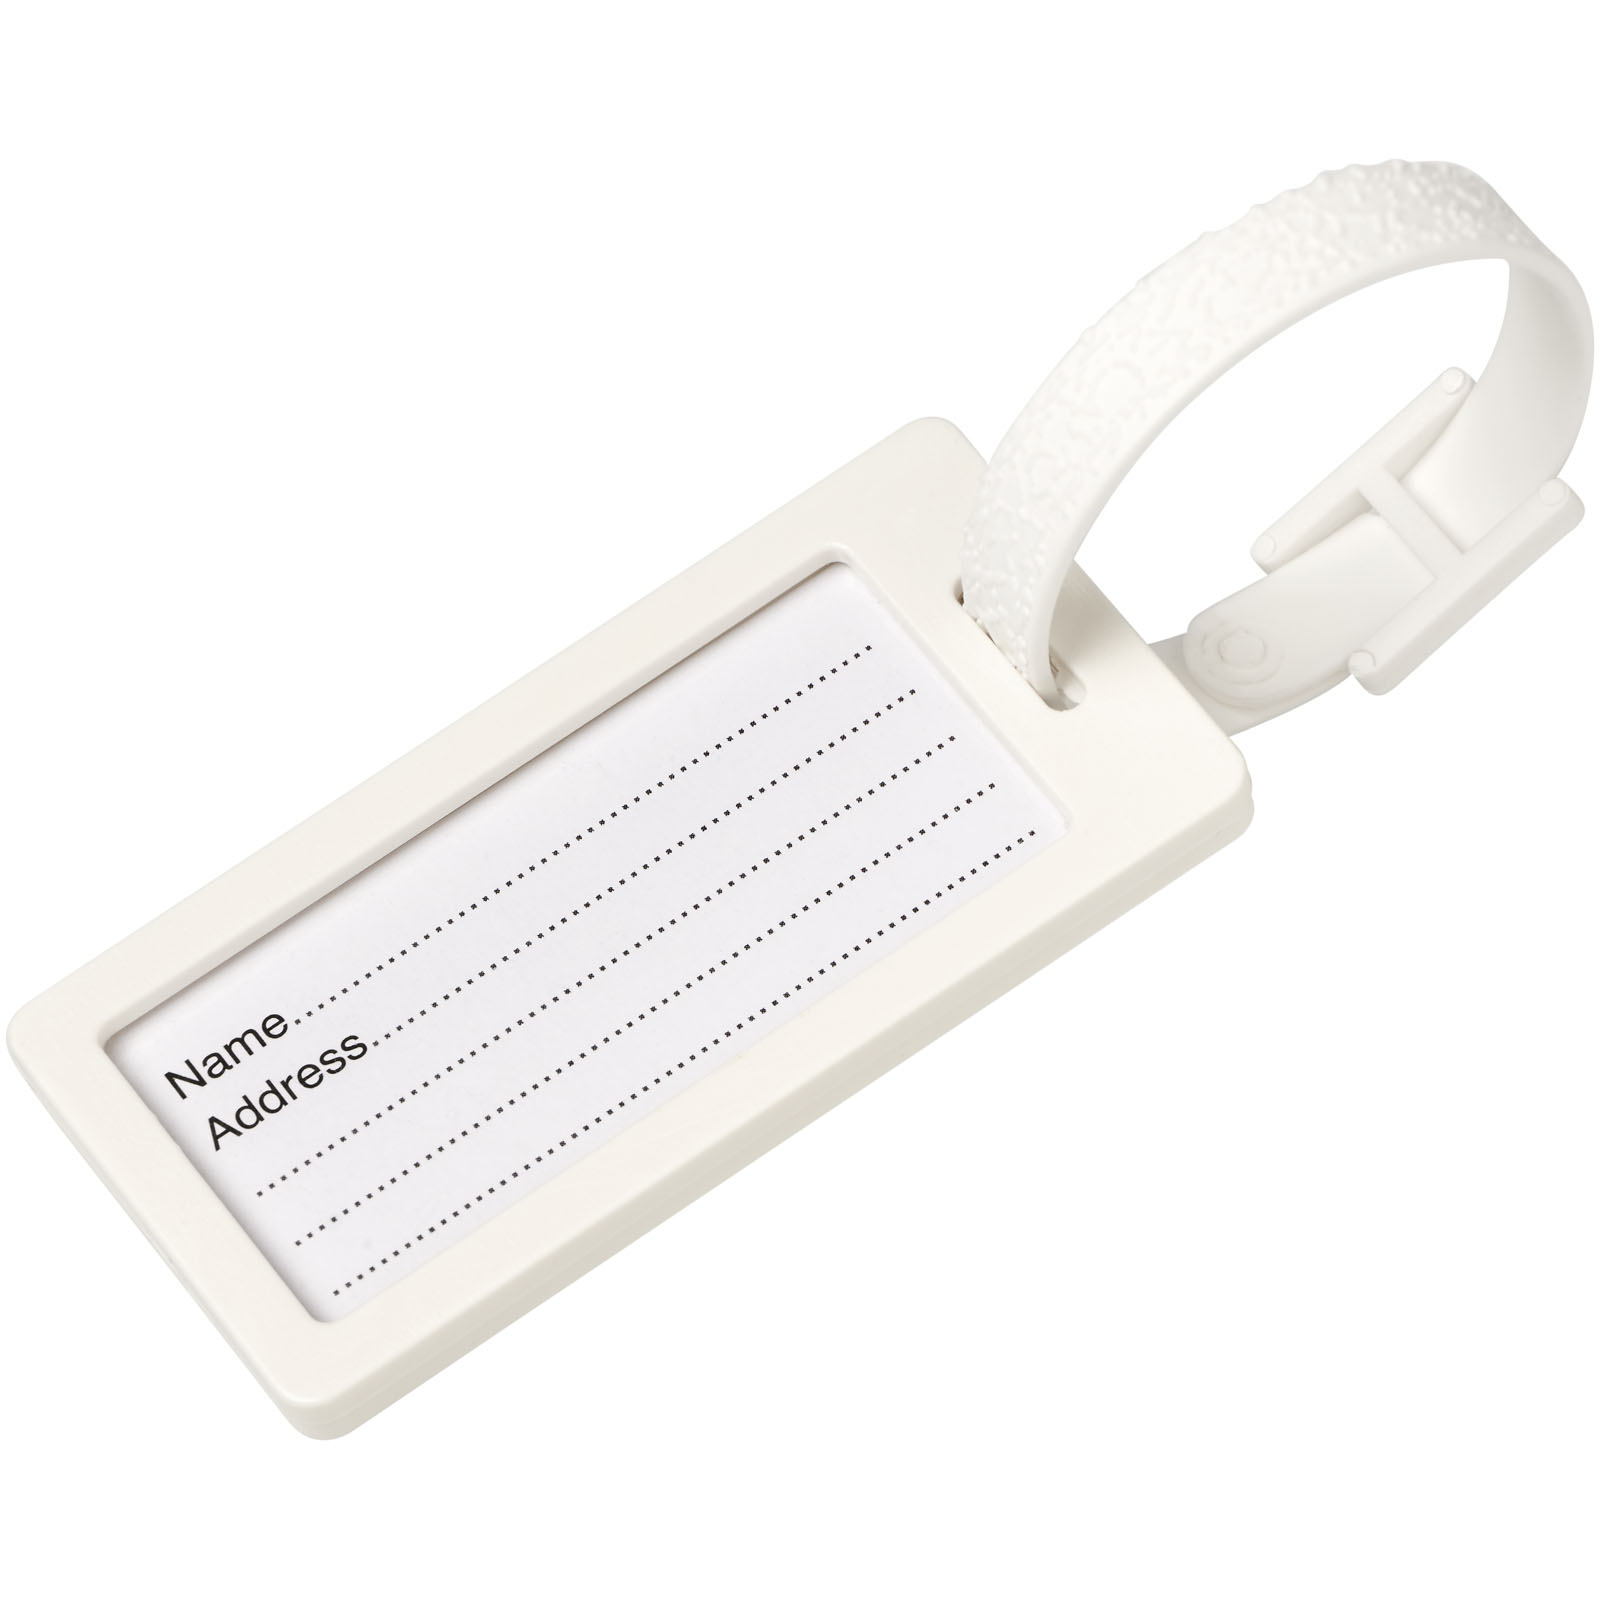 Travel Accessories - River recycled window luggage tag